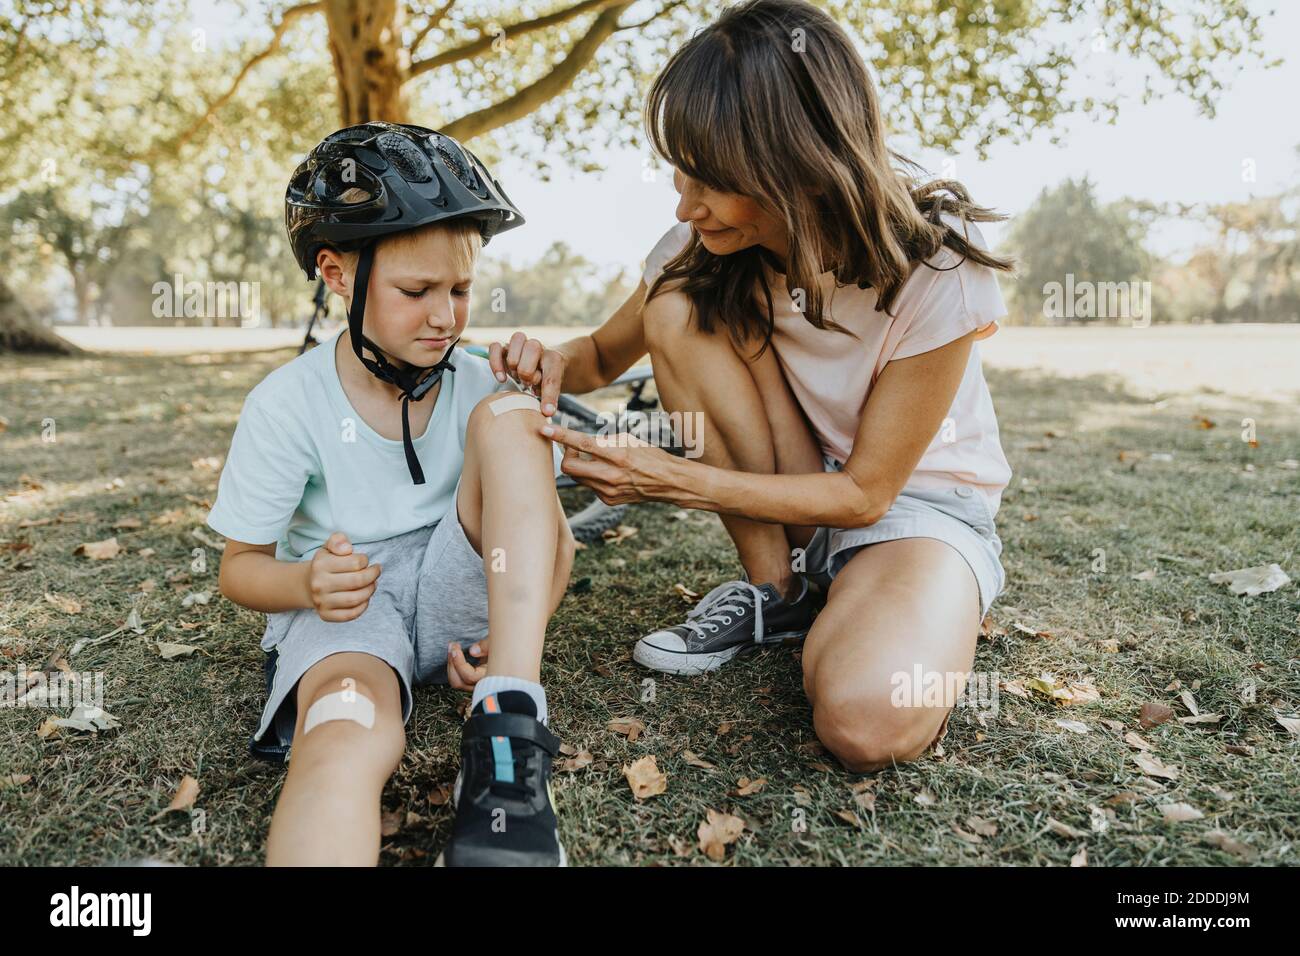 Mother putting bandage on son's knee while sitting in public park during sunny day Stock Photo